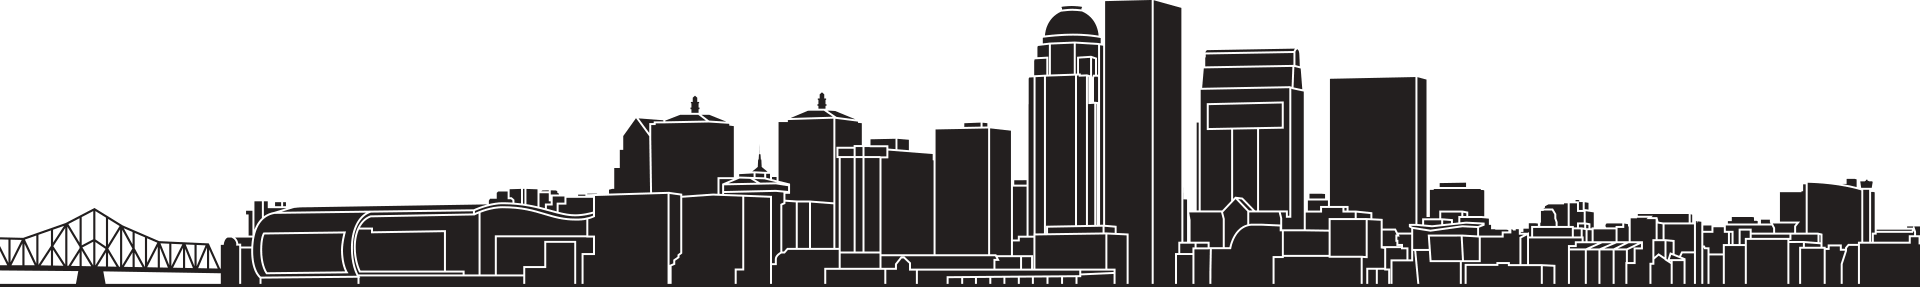 Visit louisville why is. Skyline clipart large city